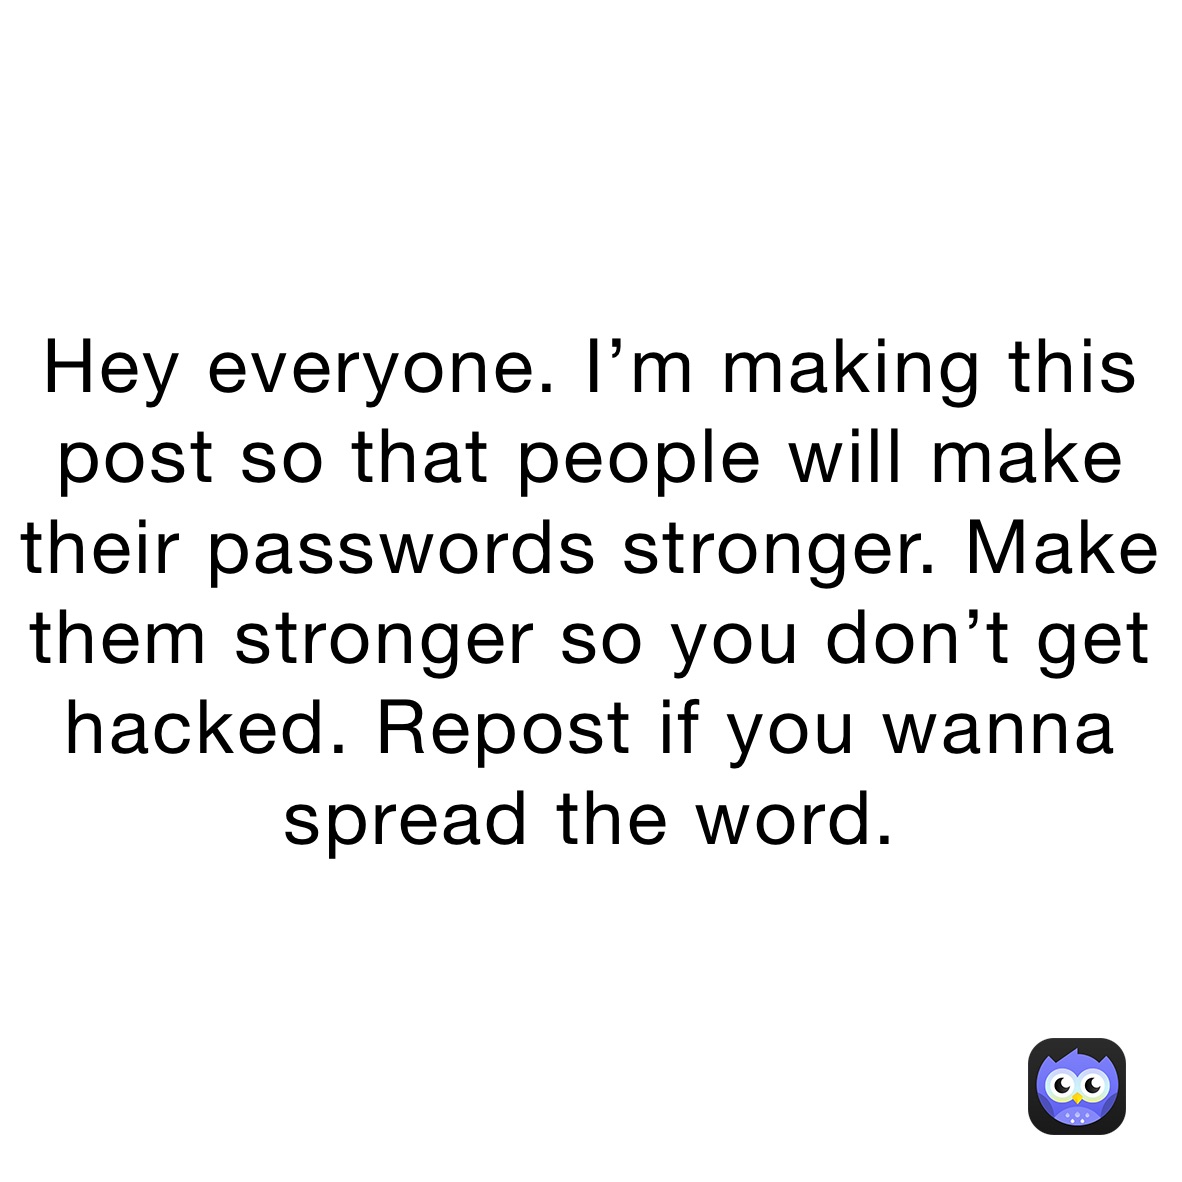 Hey everyone. I’m making this post so that people will make their passwords stronger. Make them stronger so you don’t get hacked. Repost if you wanna spread the word.